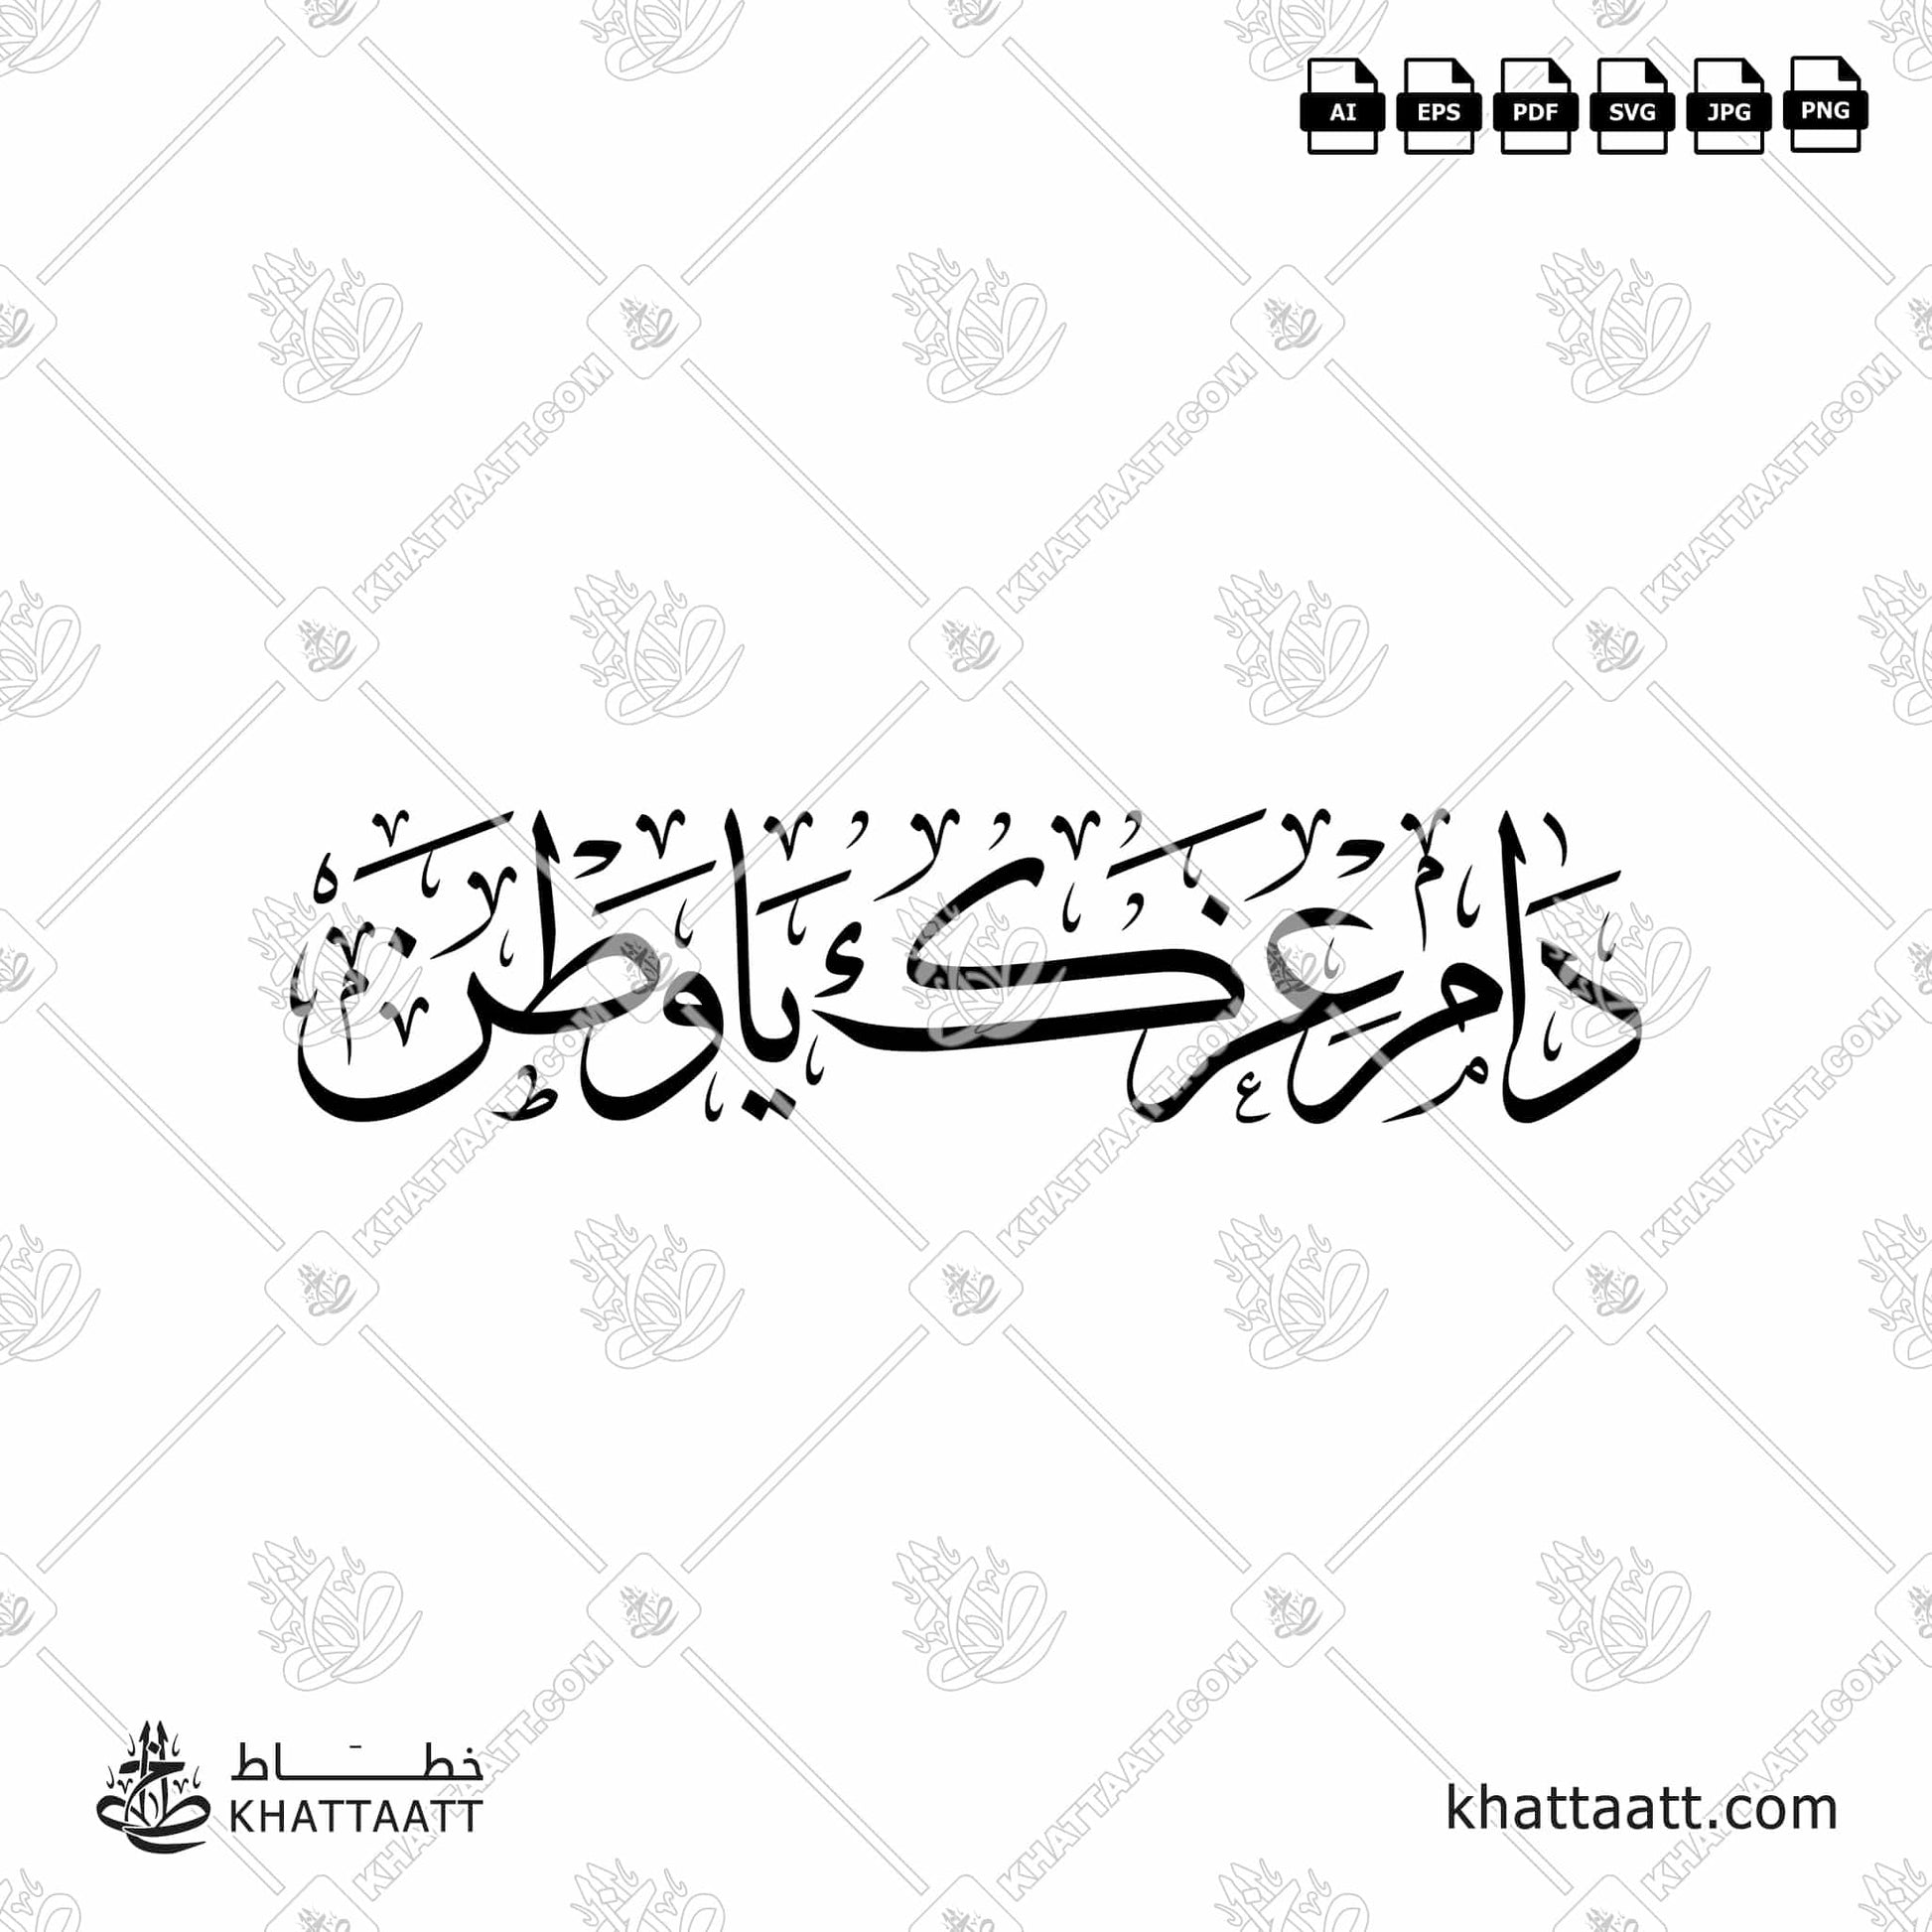 Download Arabic Calligraphy of دام عزك يا وطن - Thuluth in Thuluth - خط الثلث in vector and .png